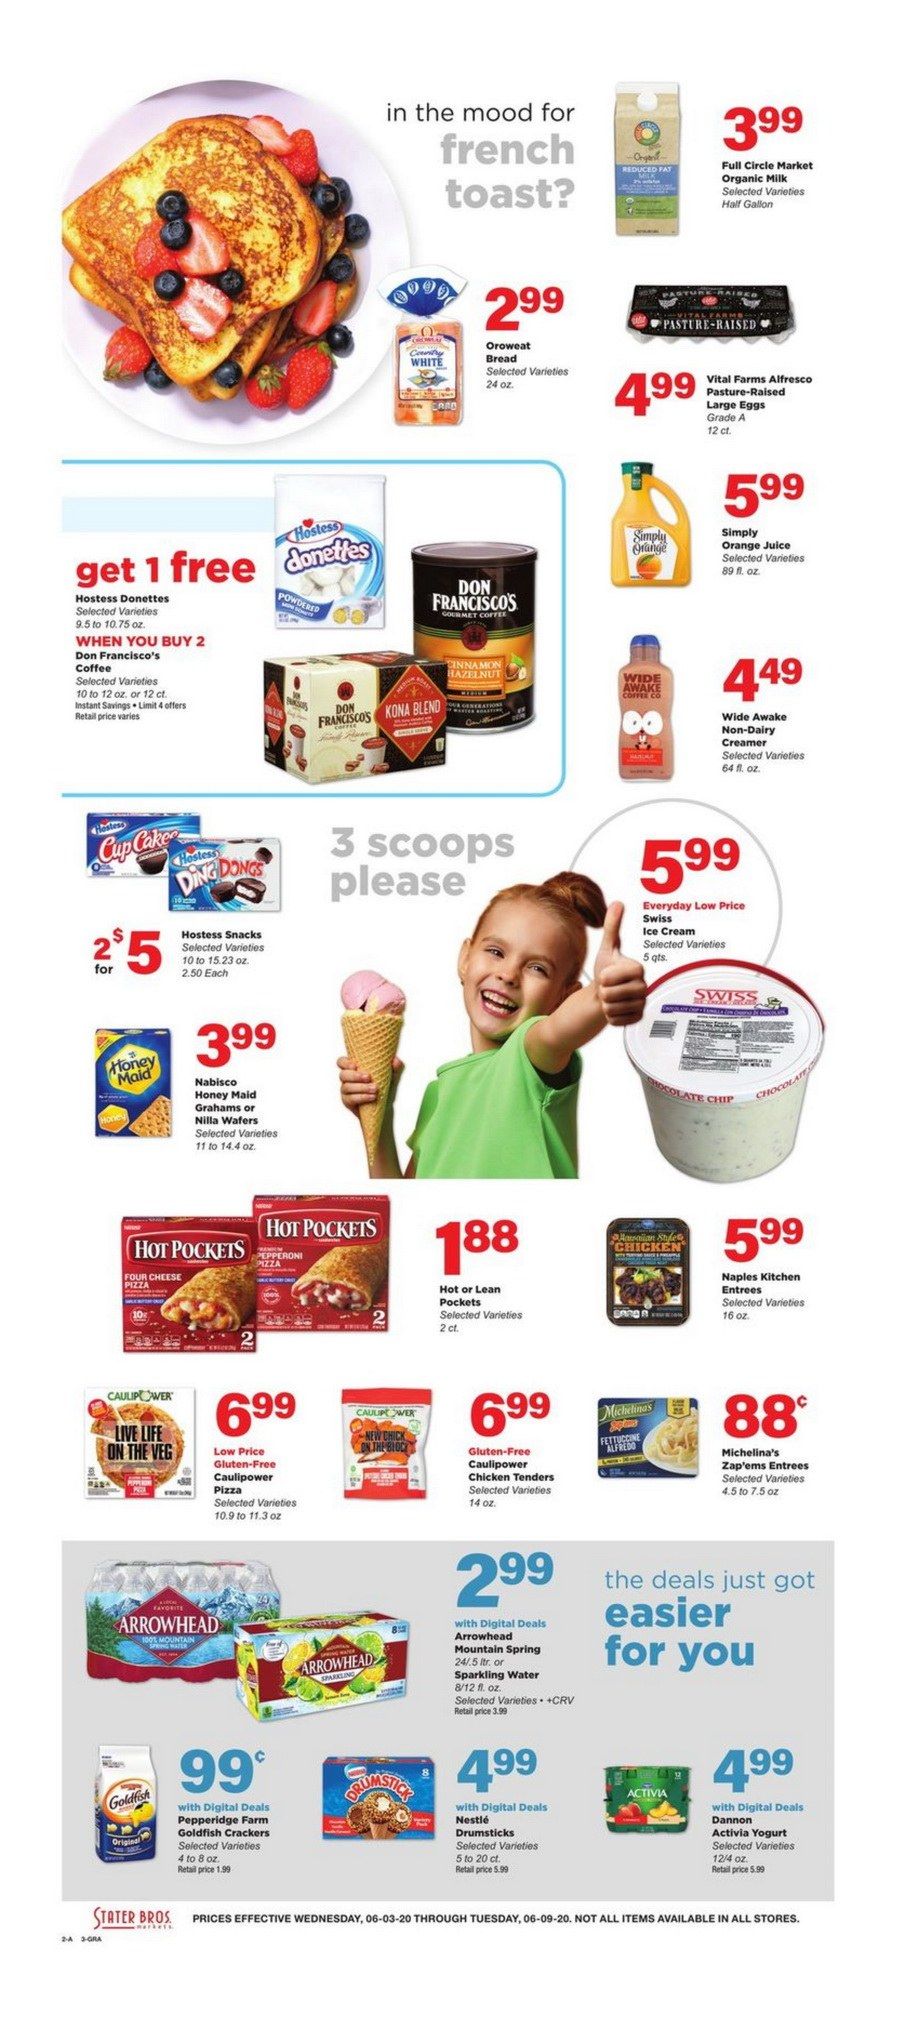 stater bros weekly ad